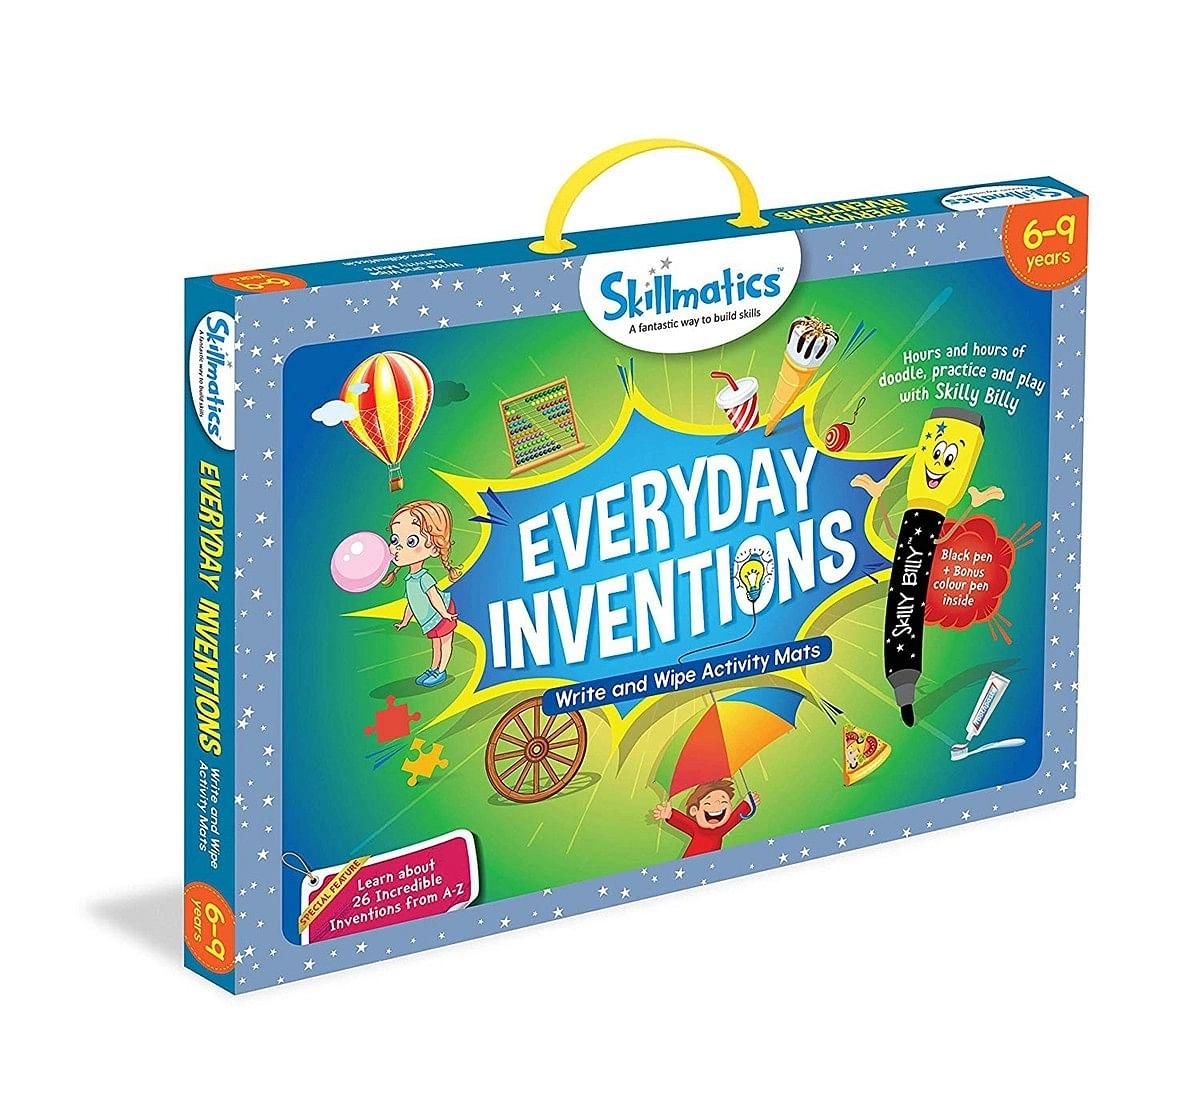  Skillmatics Educational Game: Everyday Inventions 6-9 Years (Blue) Games for Kids age 6Y+ 